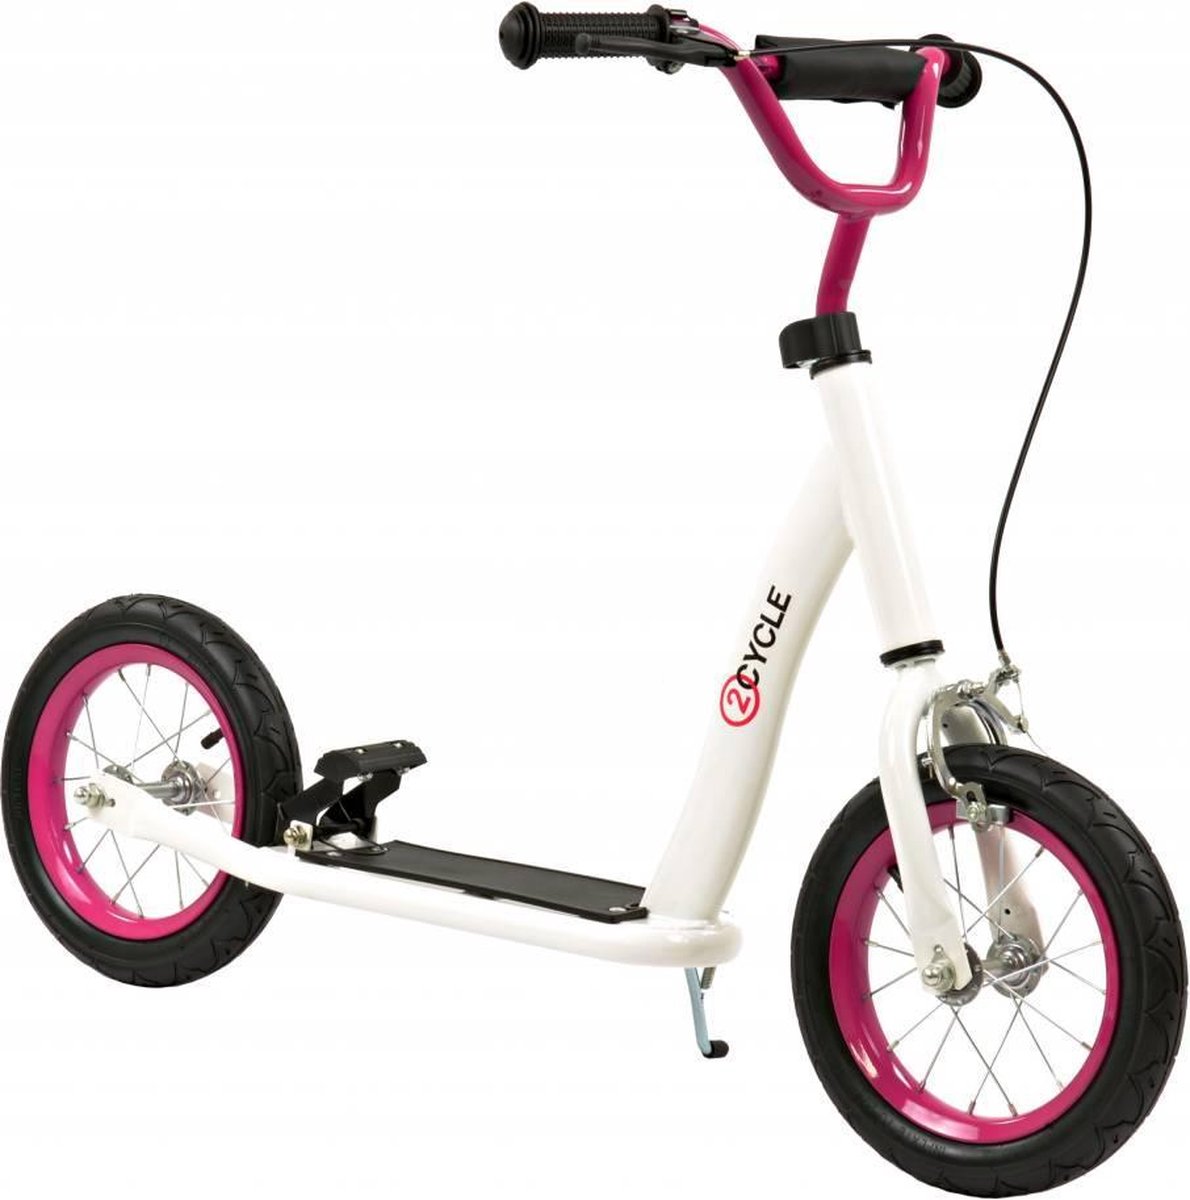 2Cycle Wit/Roze met Luchtbanden 12 inch (1557) - Step | bol.com